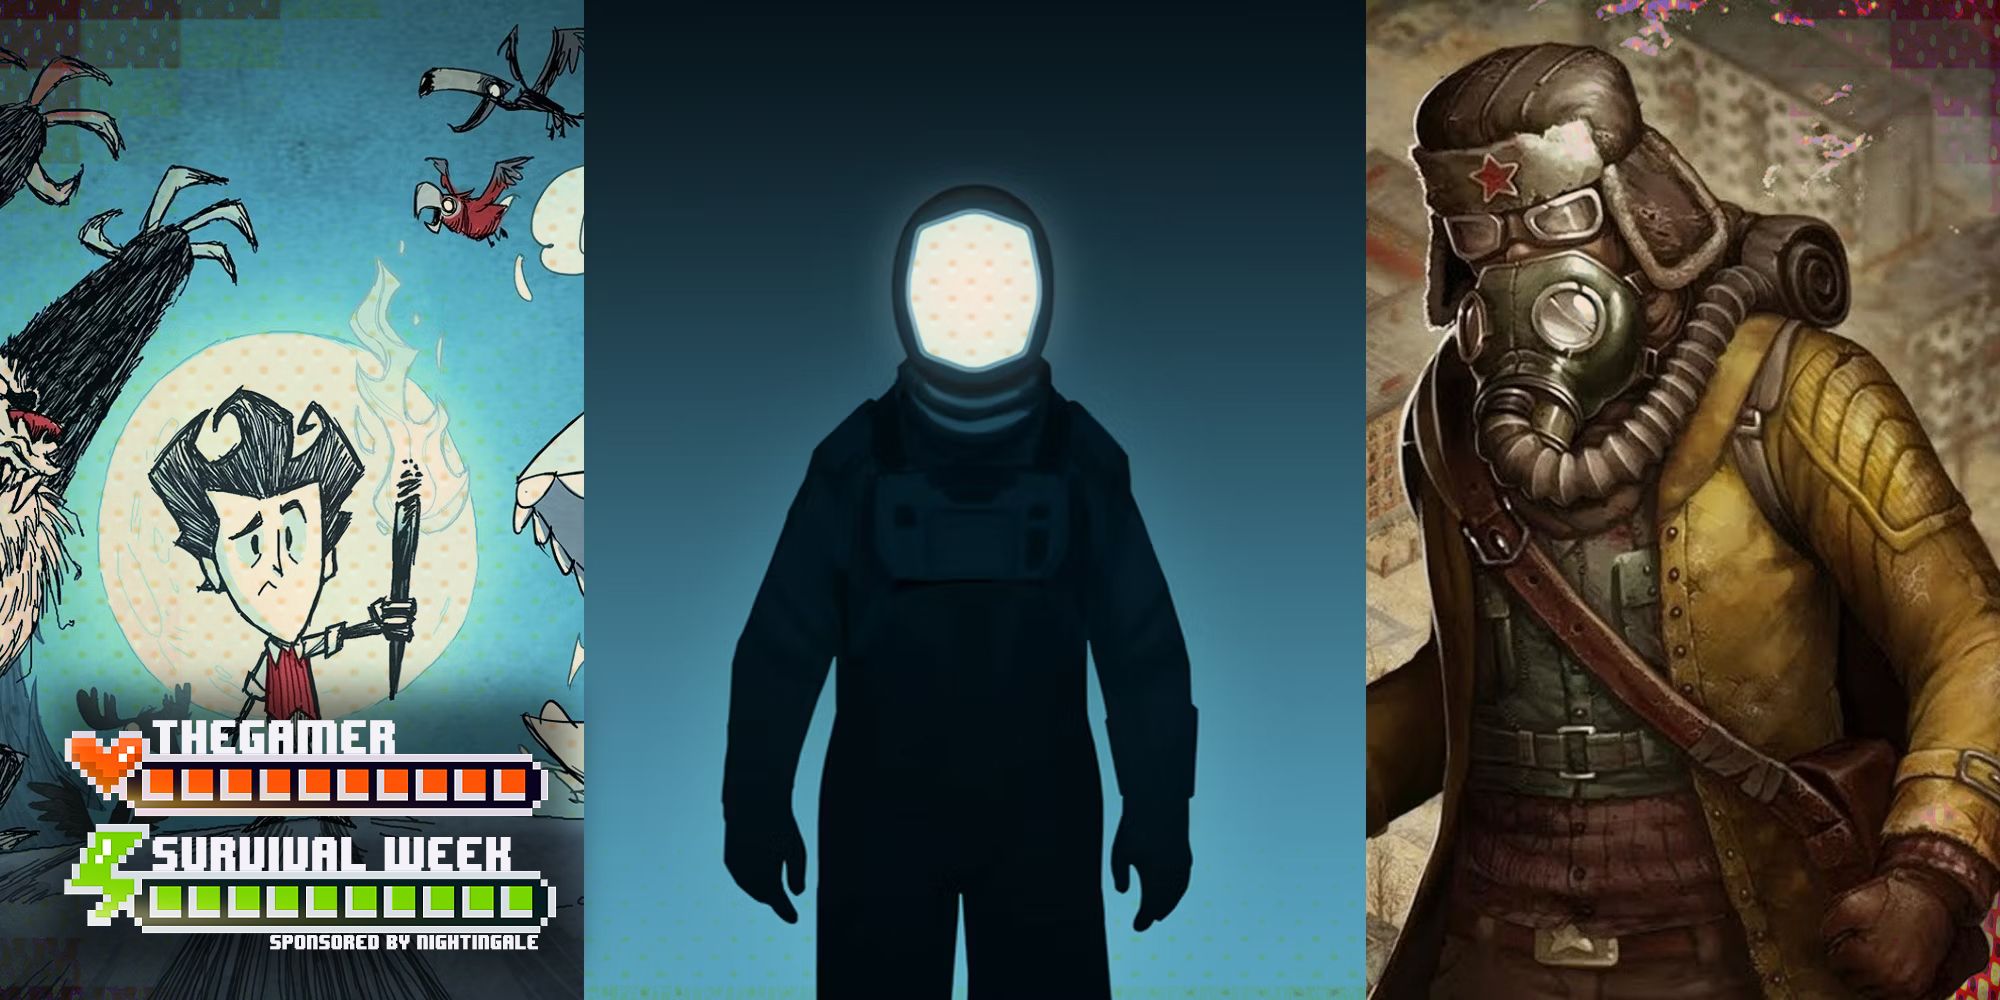 Dont Starve, Lifeline, and Day R split into three vertical slicess with TheGamer over an orange health bar and Survival Week over a green stamina bar in the bottom left corner, with Sponsored by Nightingale written underneath